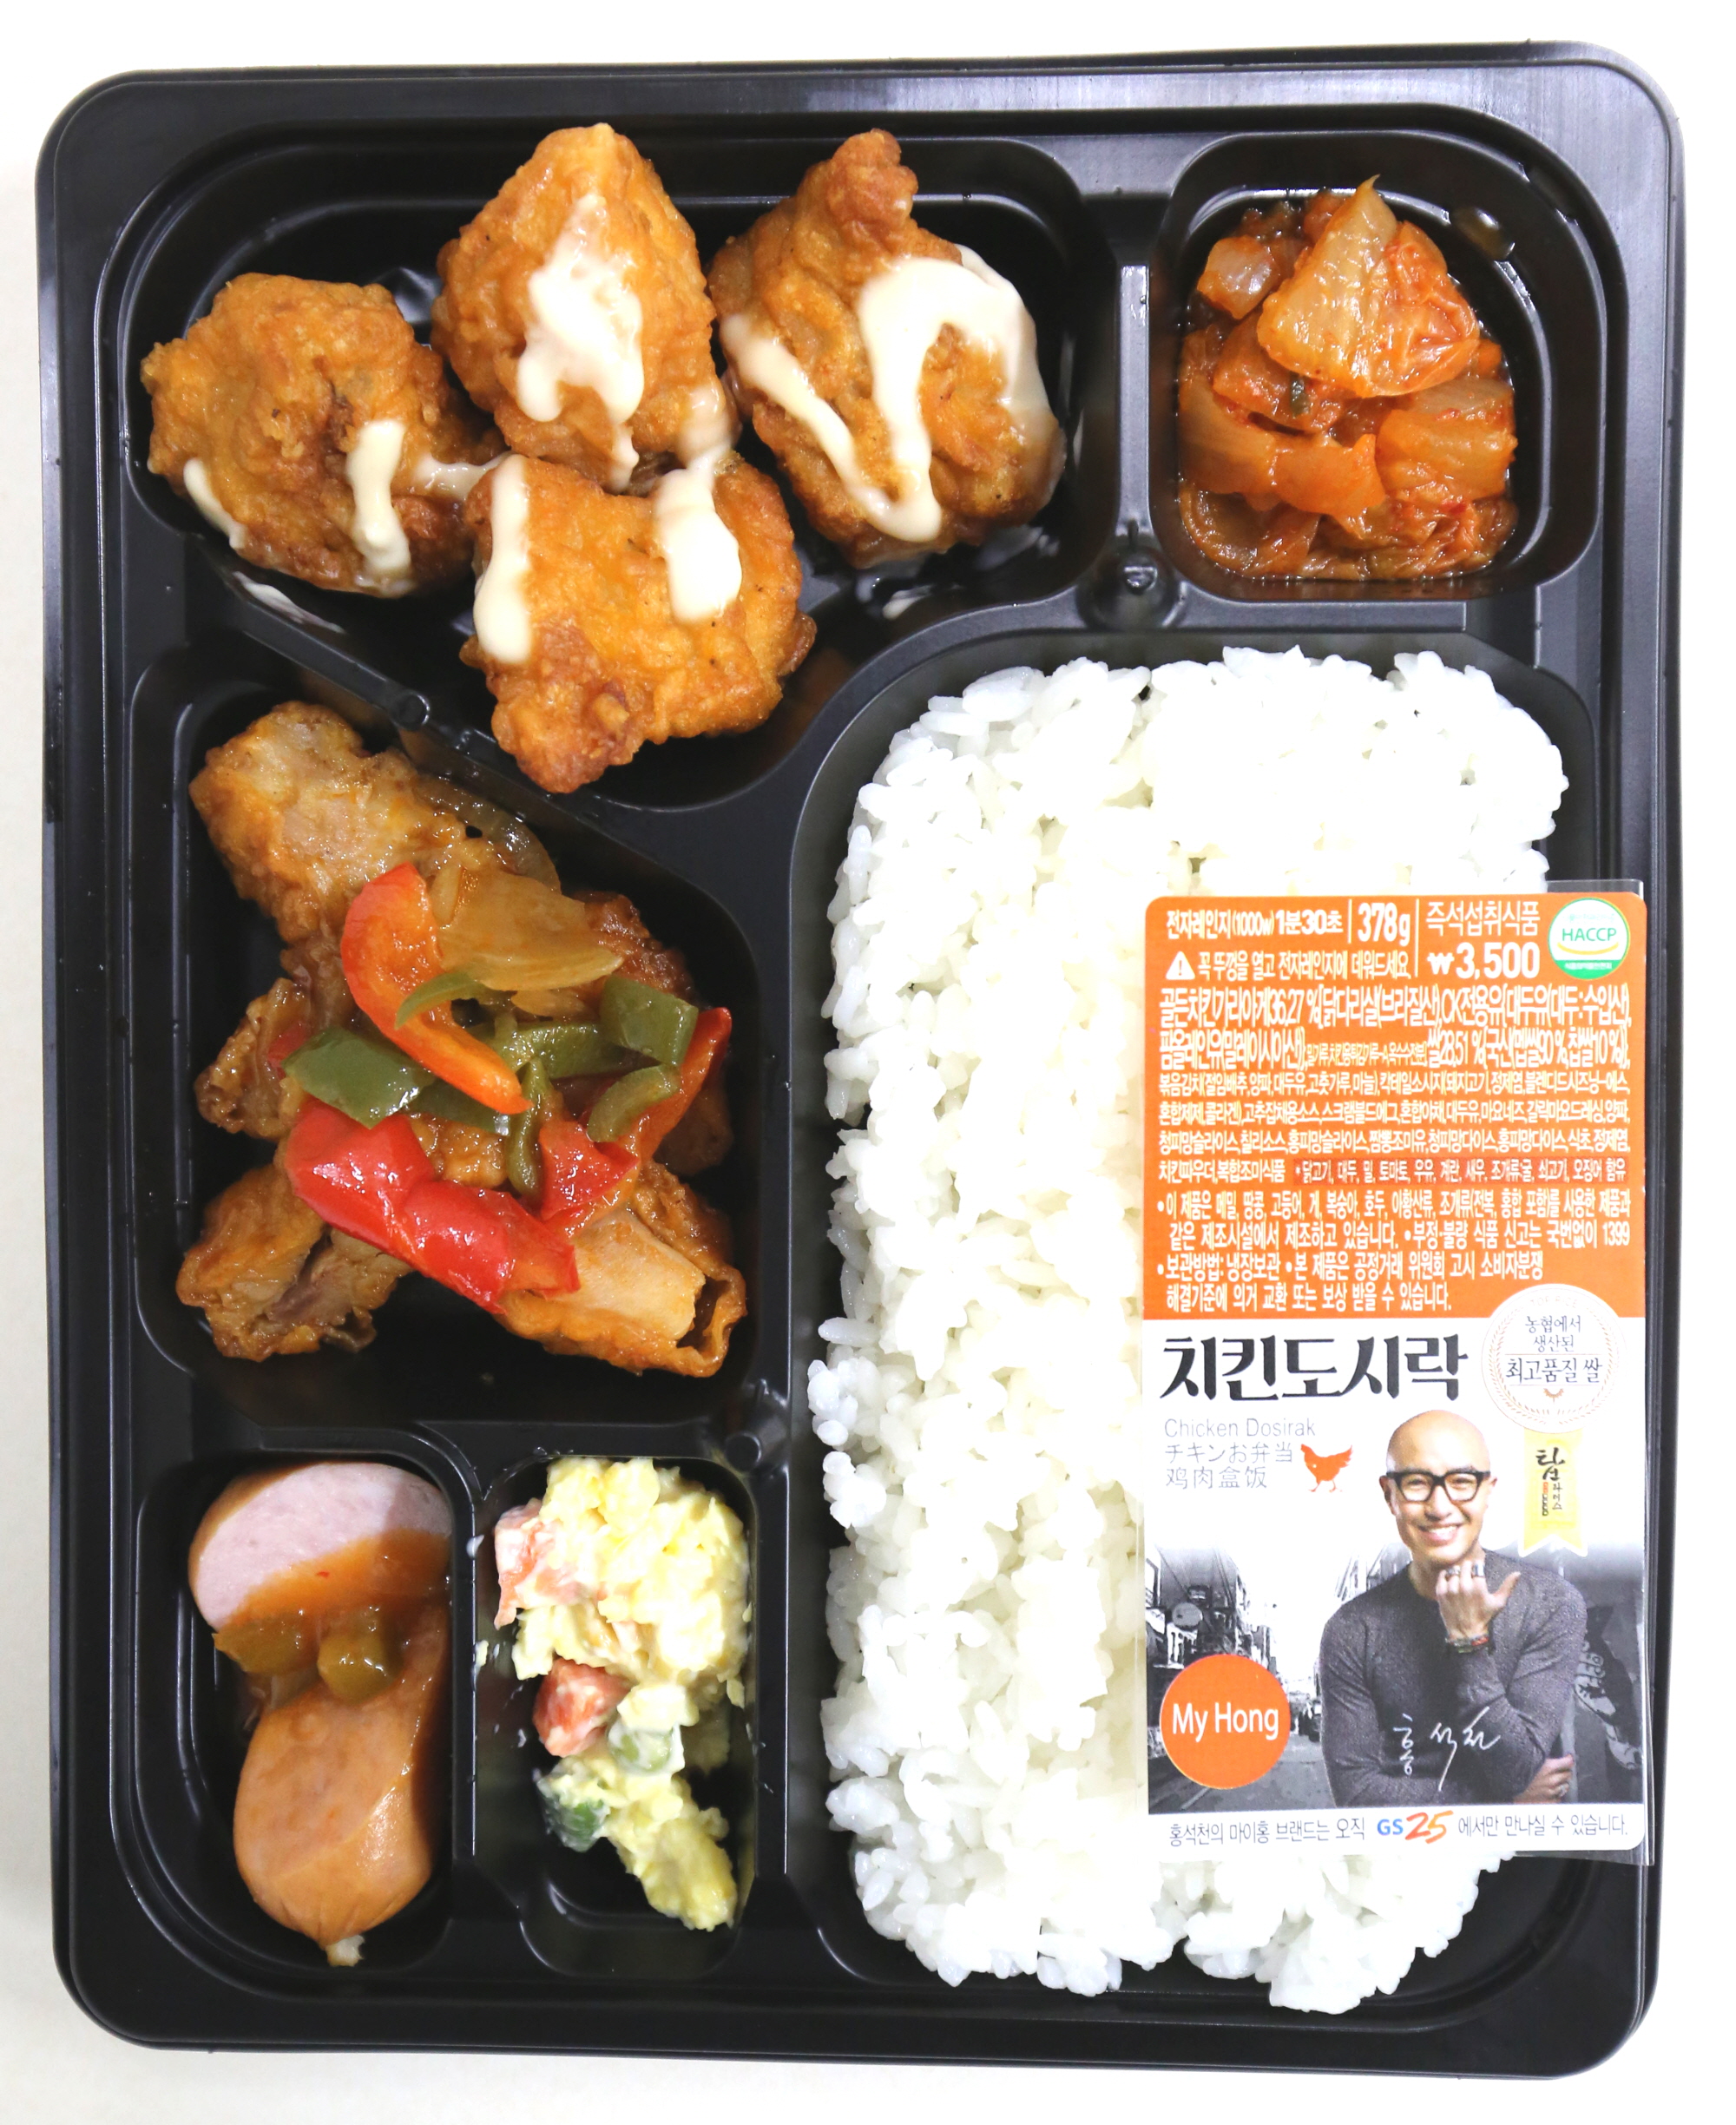 Popularity of Convenience Store Lunch Boxes Soars - Businesskorea